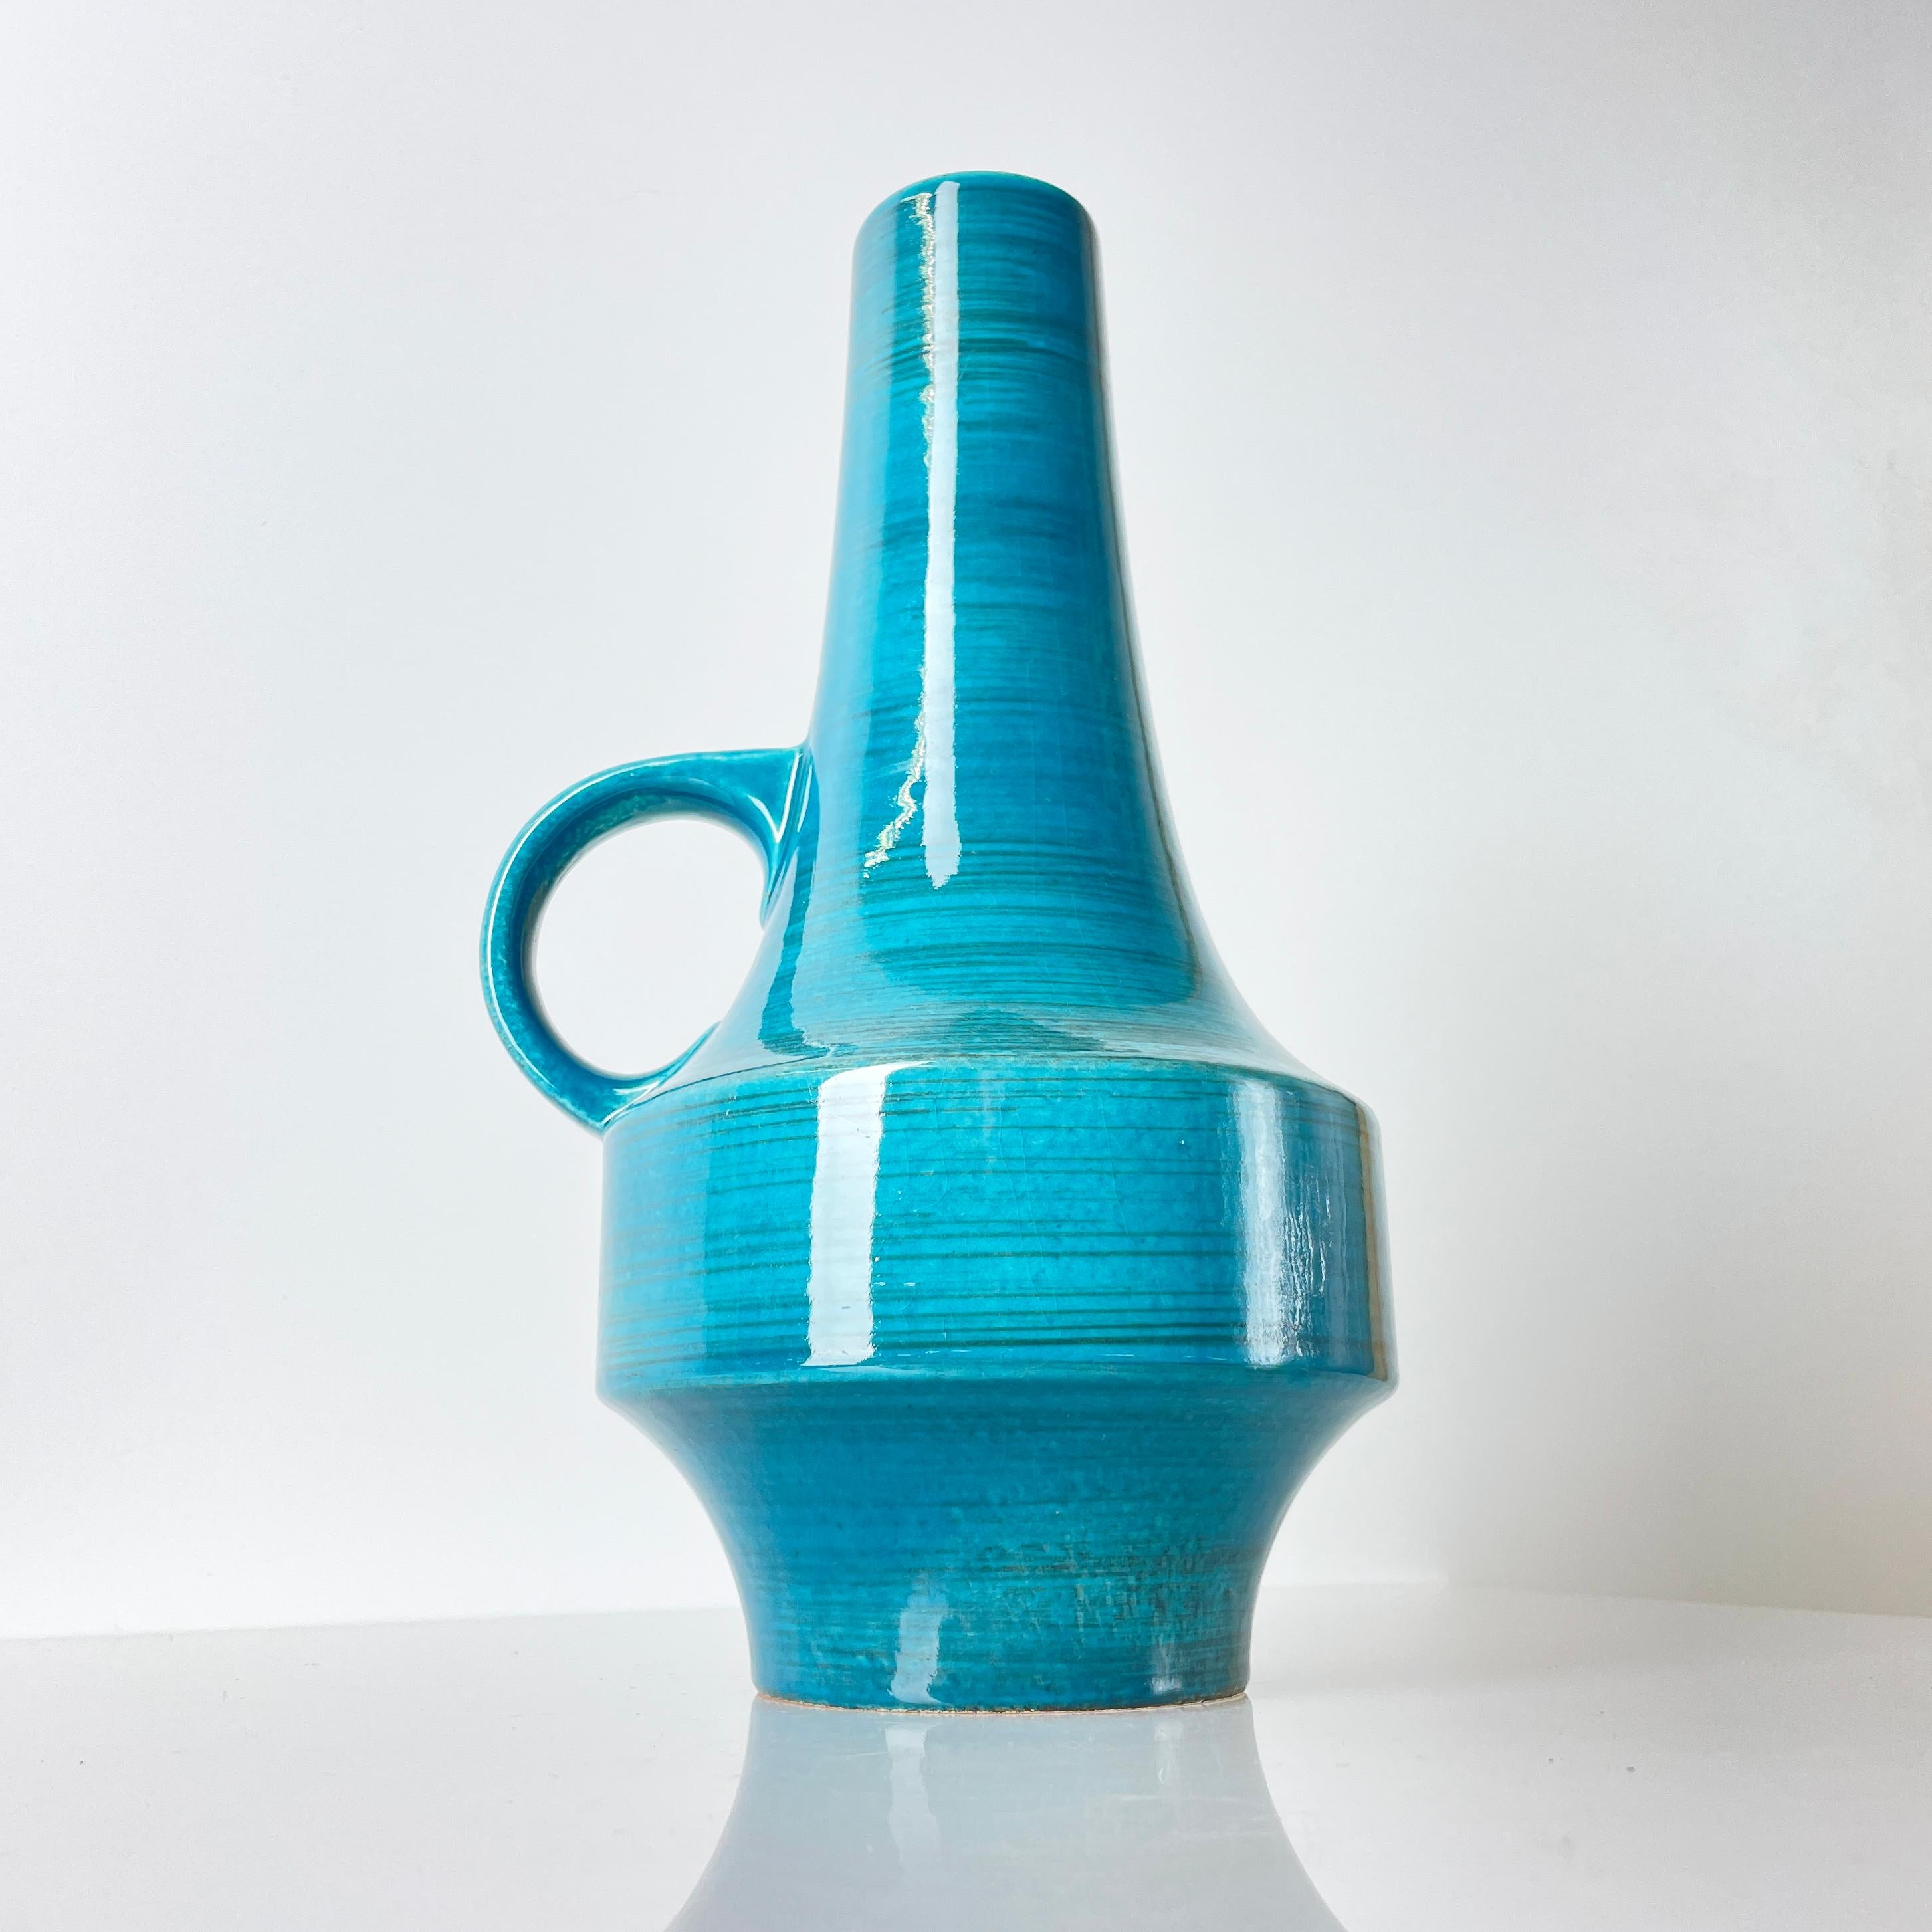 Late 60's to mid-1970's Carstens West German Ceramic Vase with vibrant turquoise glaze. Numbered on base: W. Germany 1525 - 28
Produced: Carstens Keramik, W. Germany (1960’s)
Measurements: 28 cm
Condition: Excellent